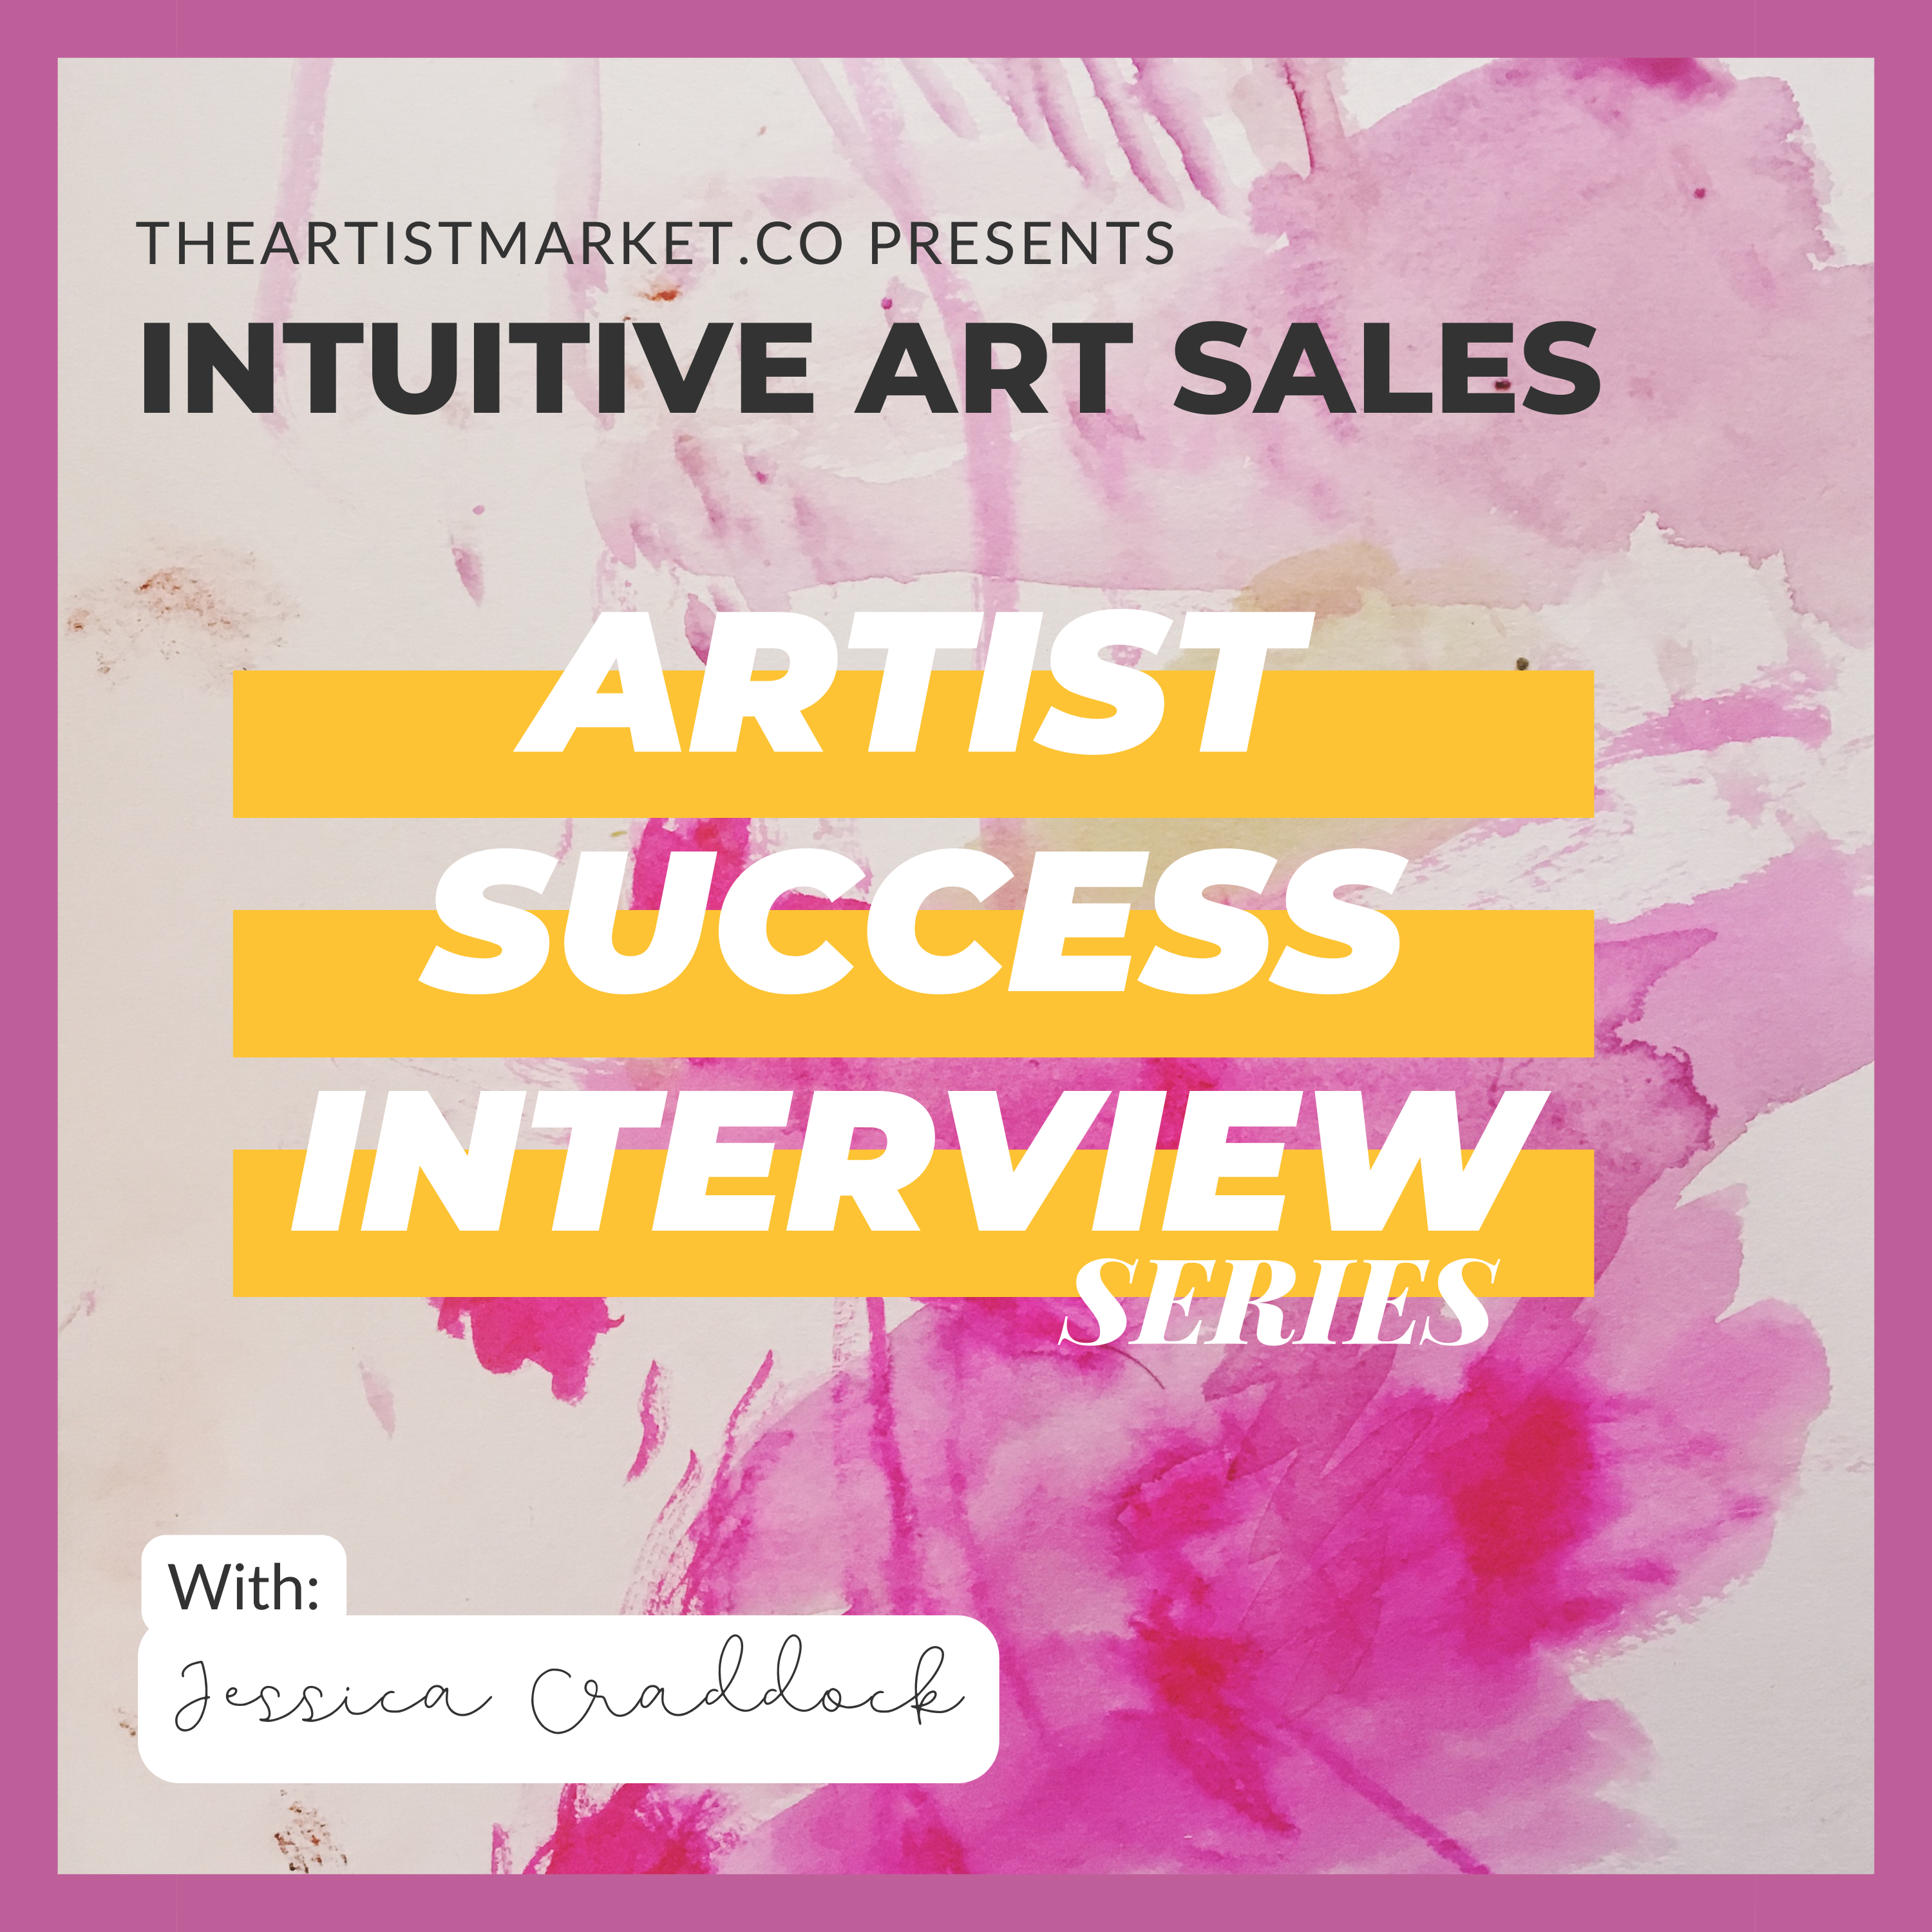 Keith Andrews: How strong relationships and strategic marketing helped Keith grow his art business. - ASIS 8